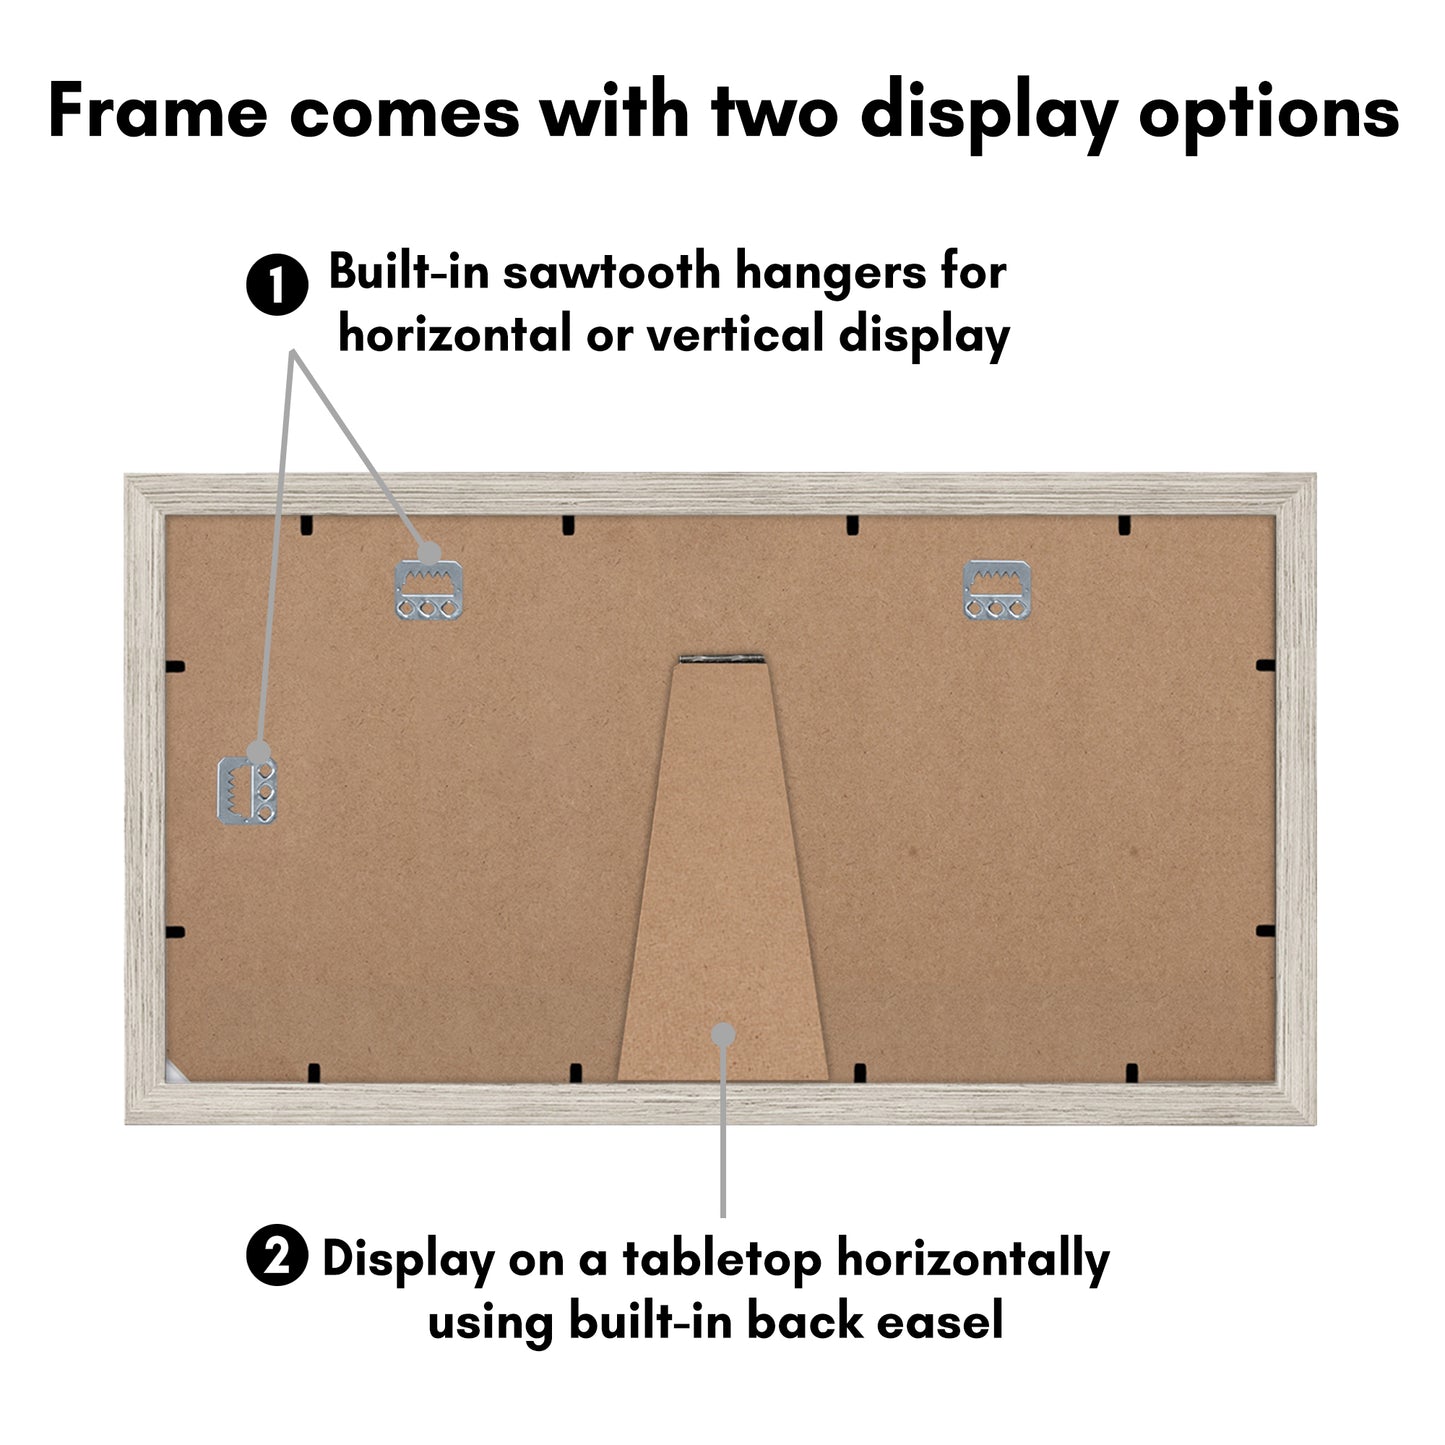 Triple Collage Picture Frame for 5x7 | Choose Size and Color